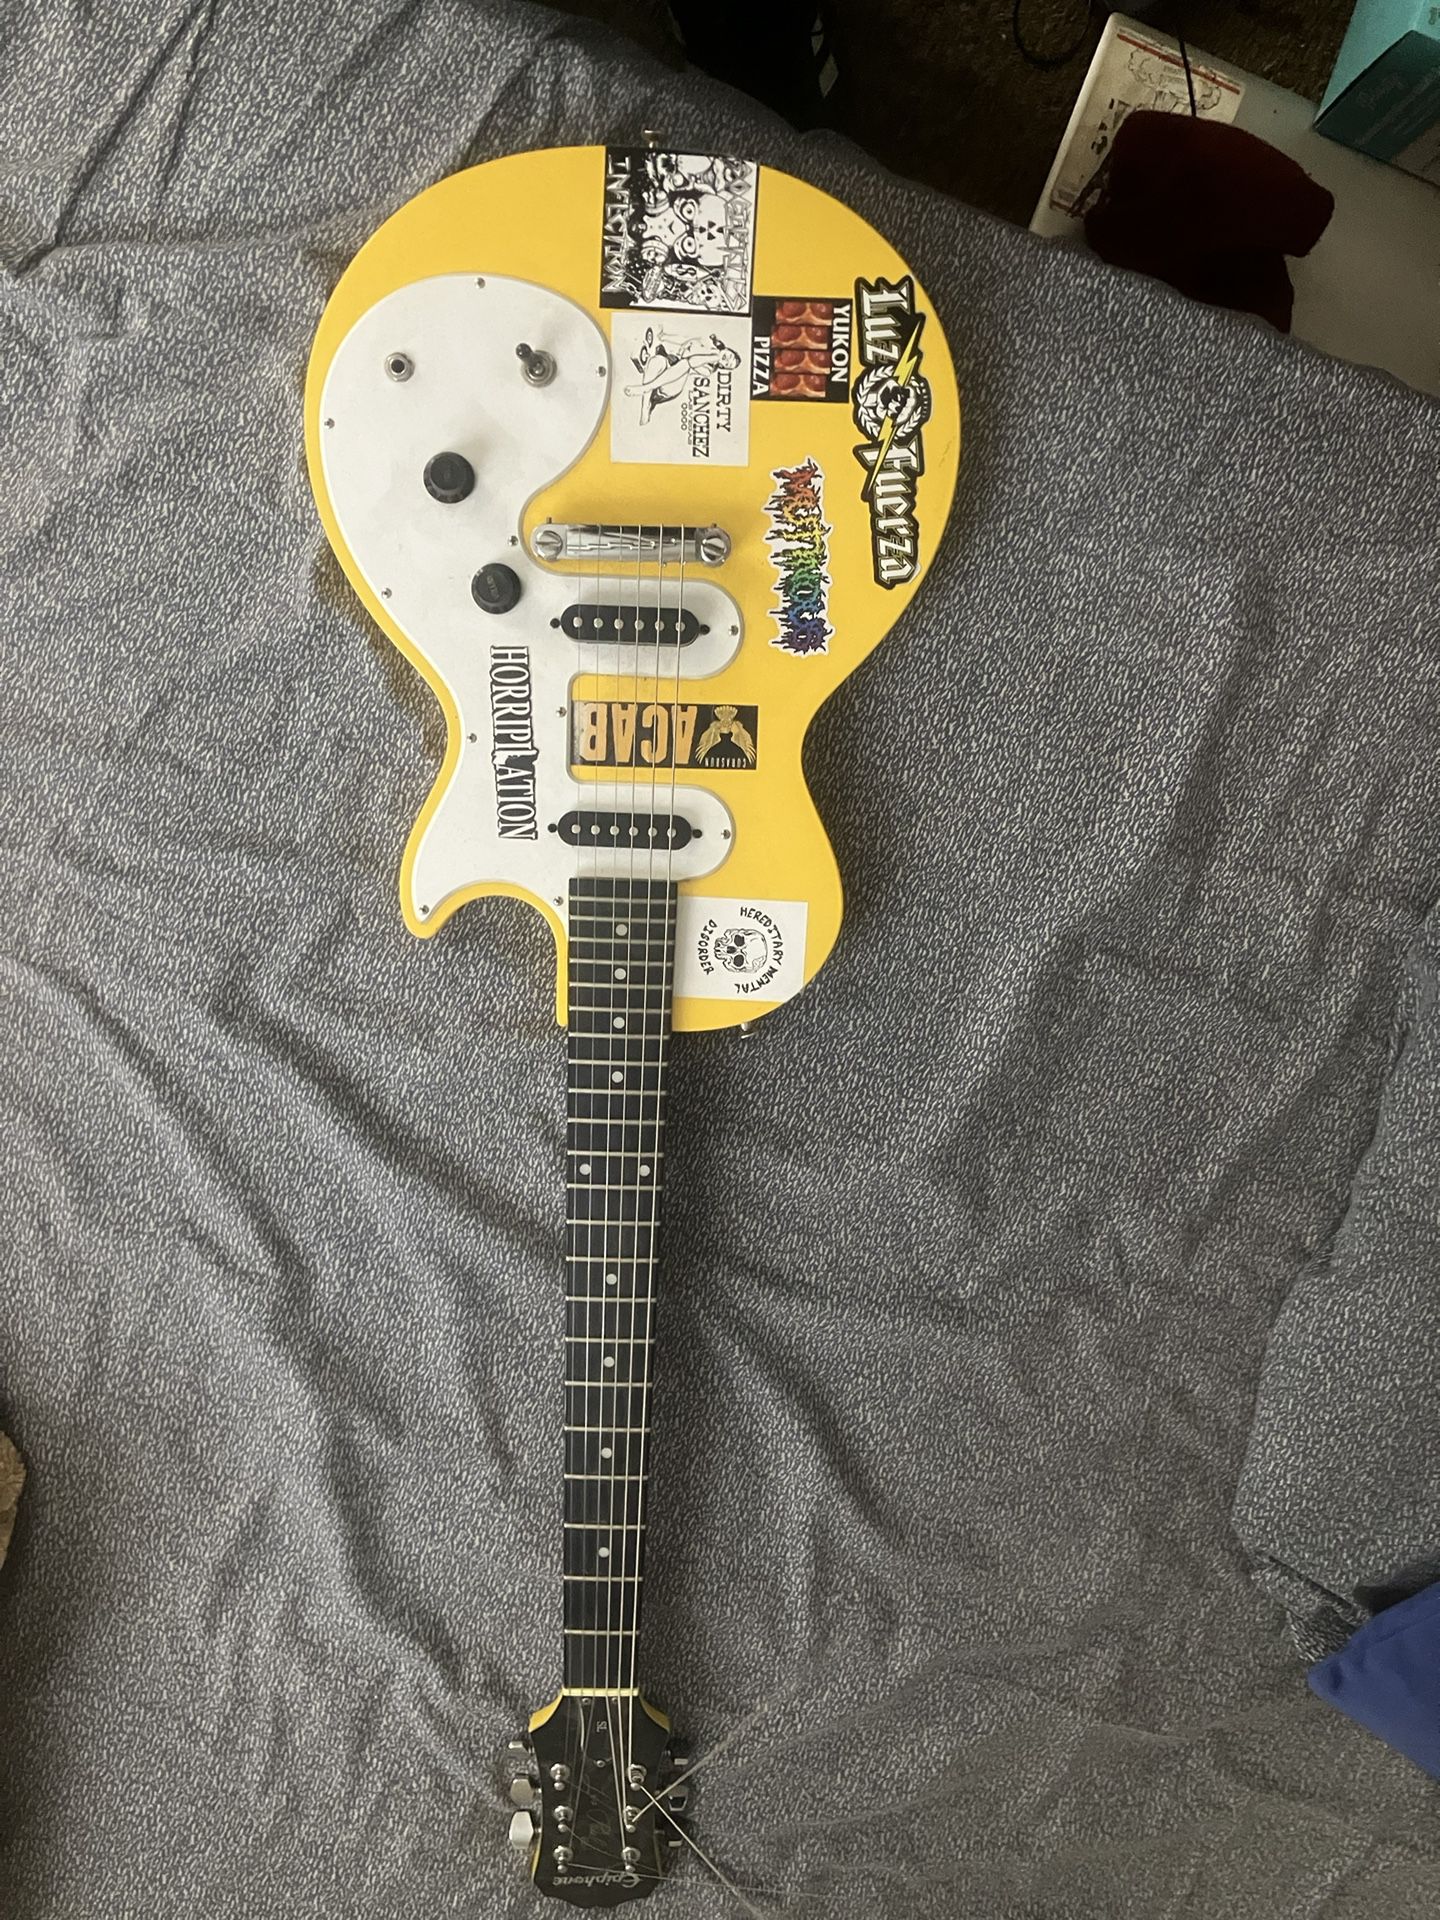 Guitar For Sell 80$